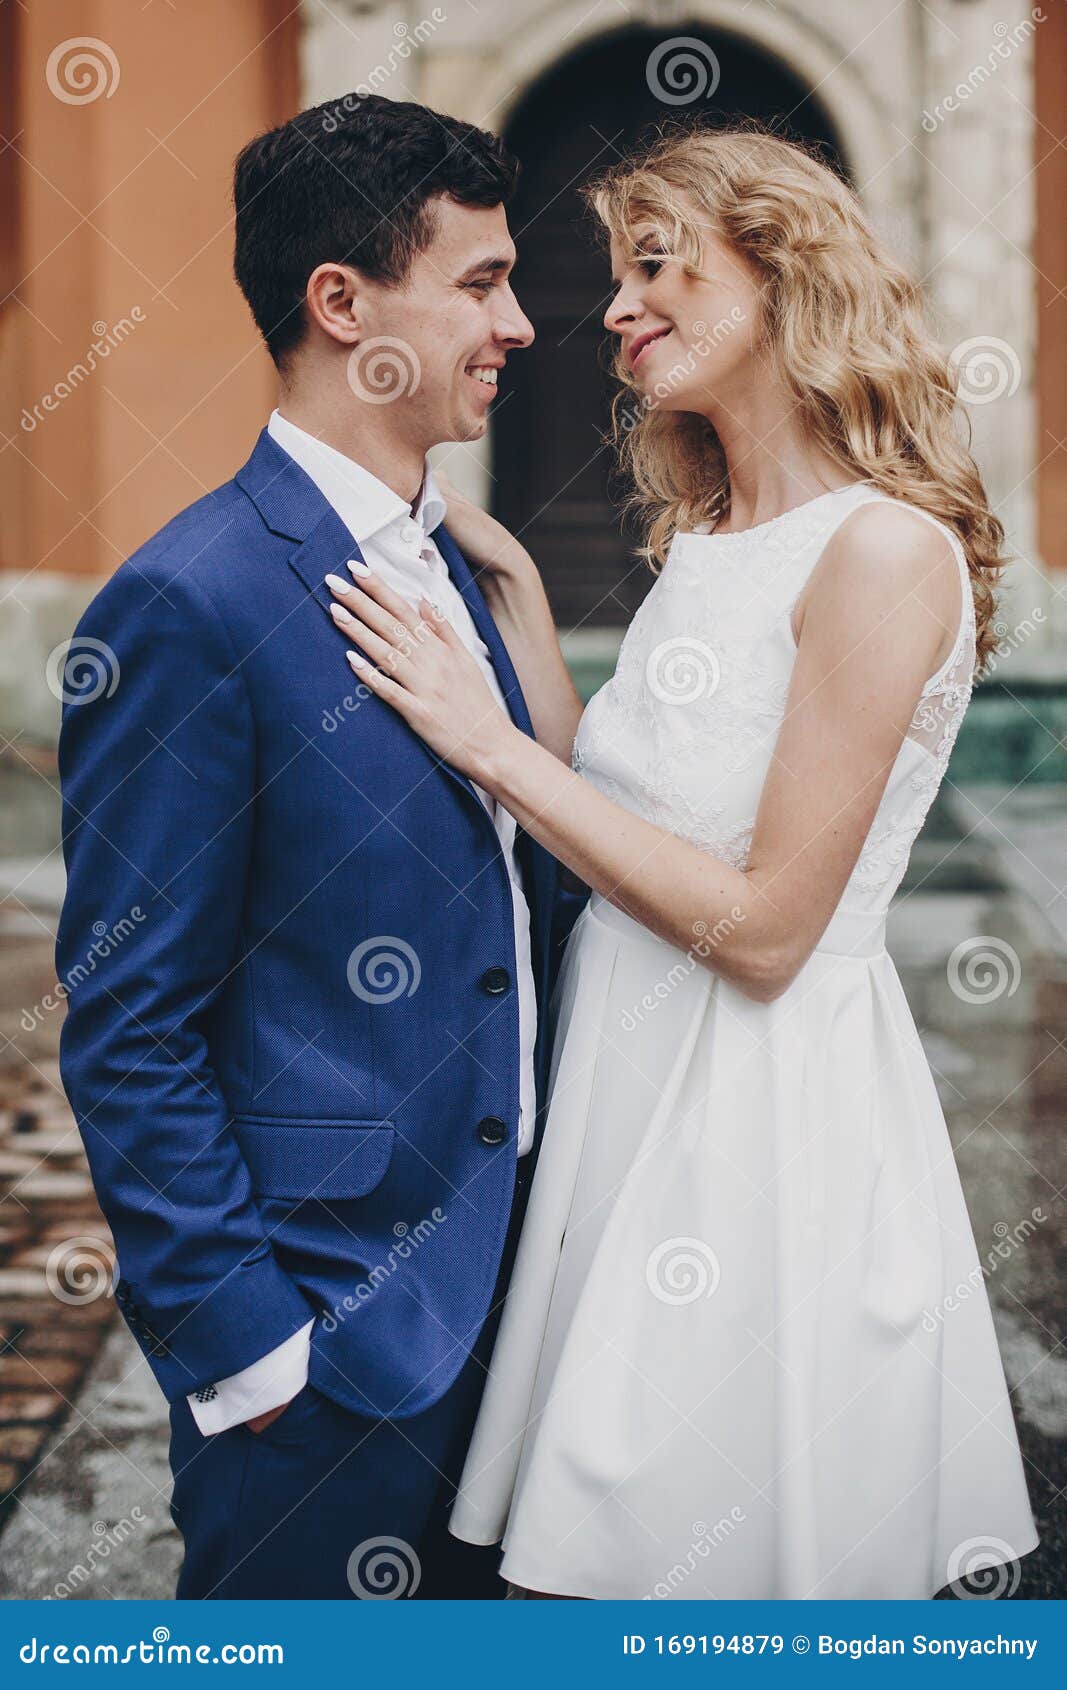 Stylish Couple Embracing In European City Street Sensual Romantic Moment Fashionable Bride And